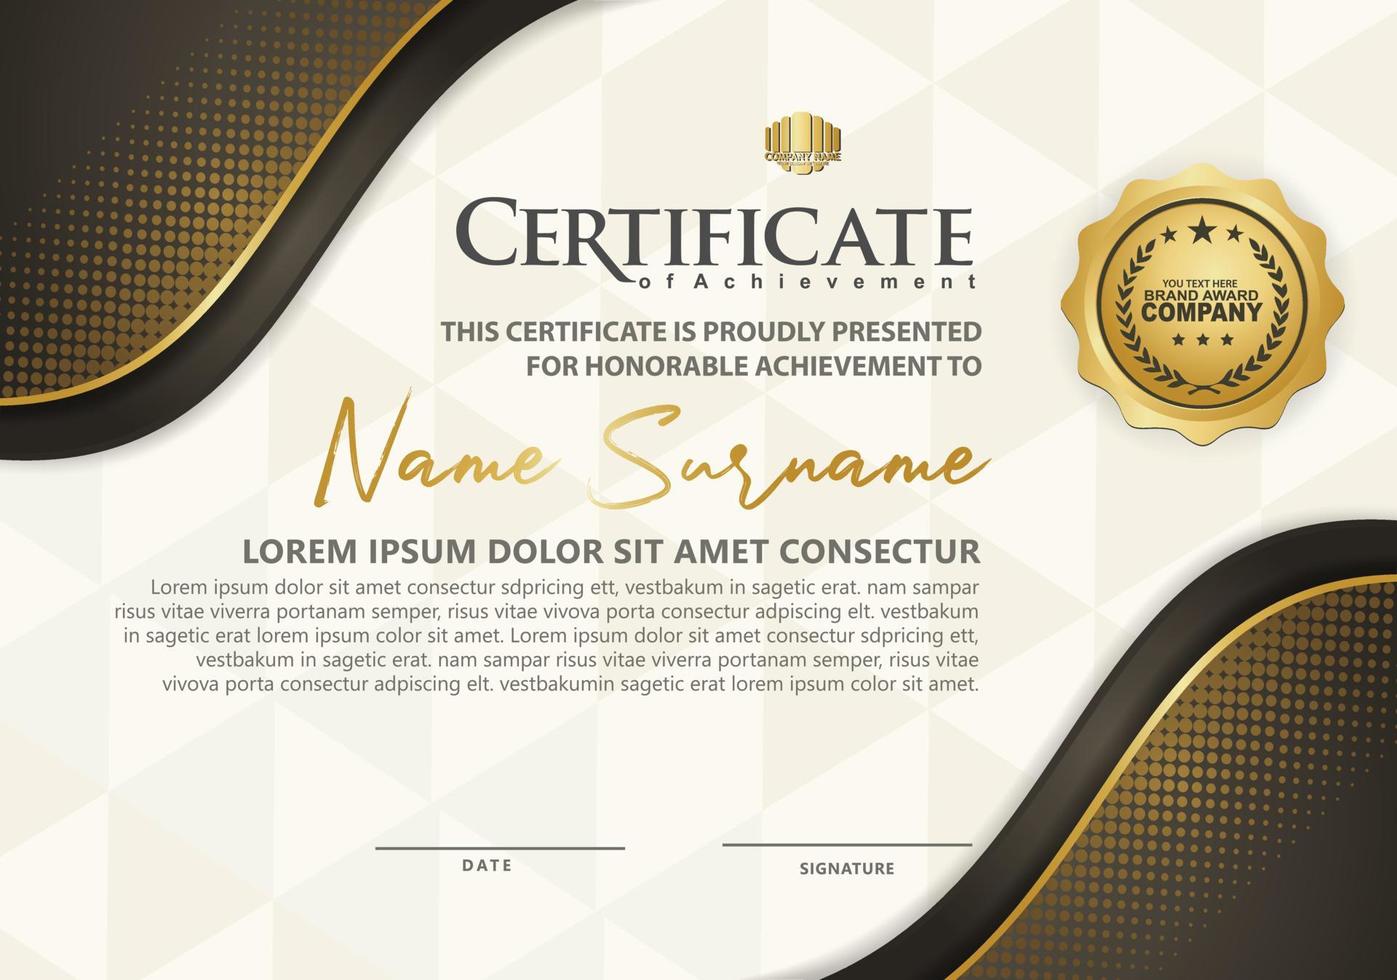 certificate template with luxury and elegant texture pattern background vector